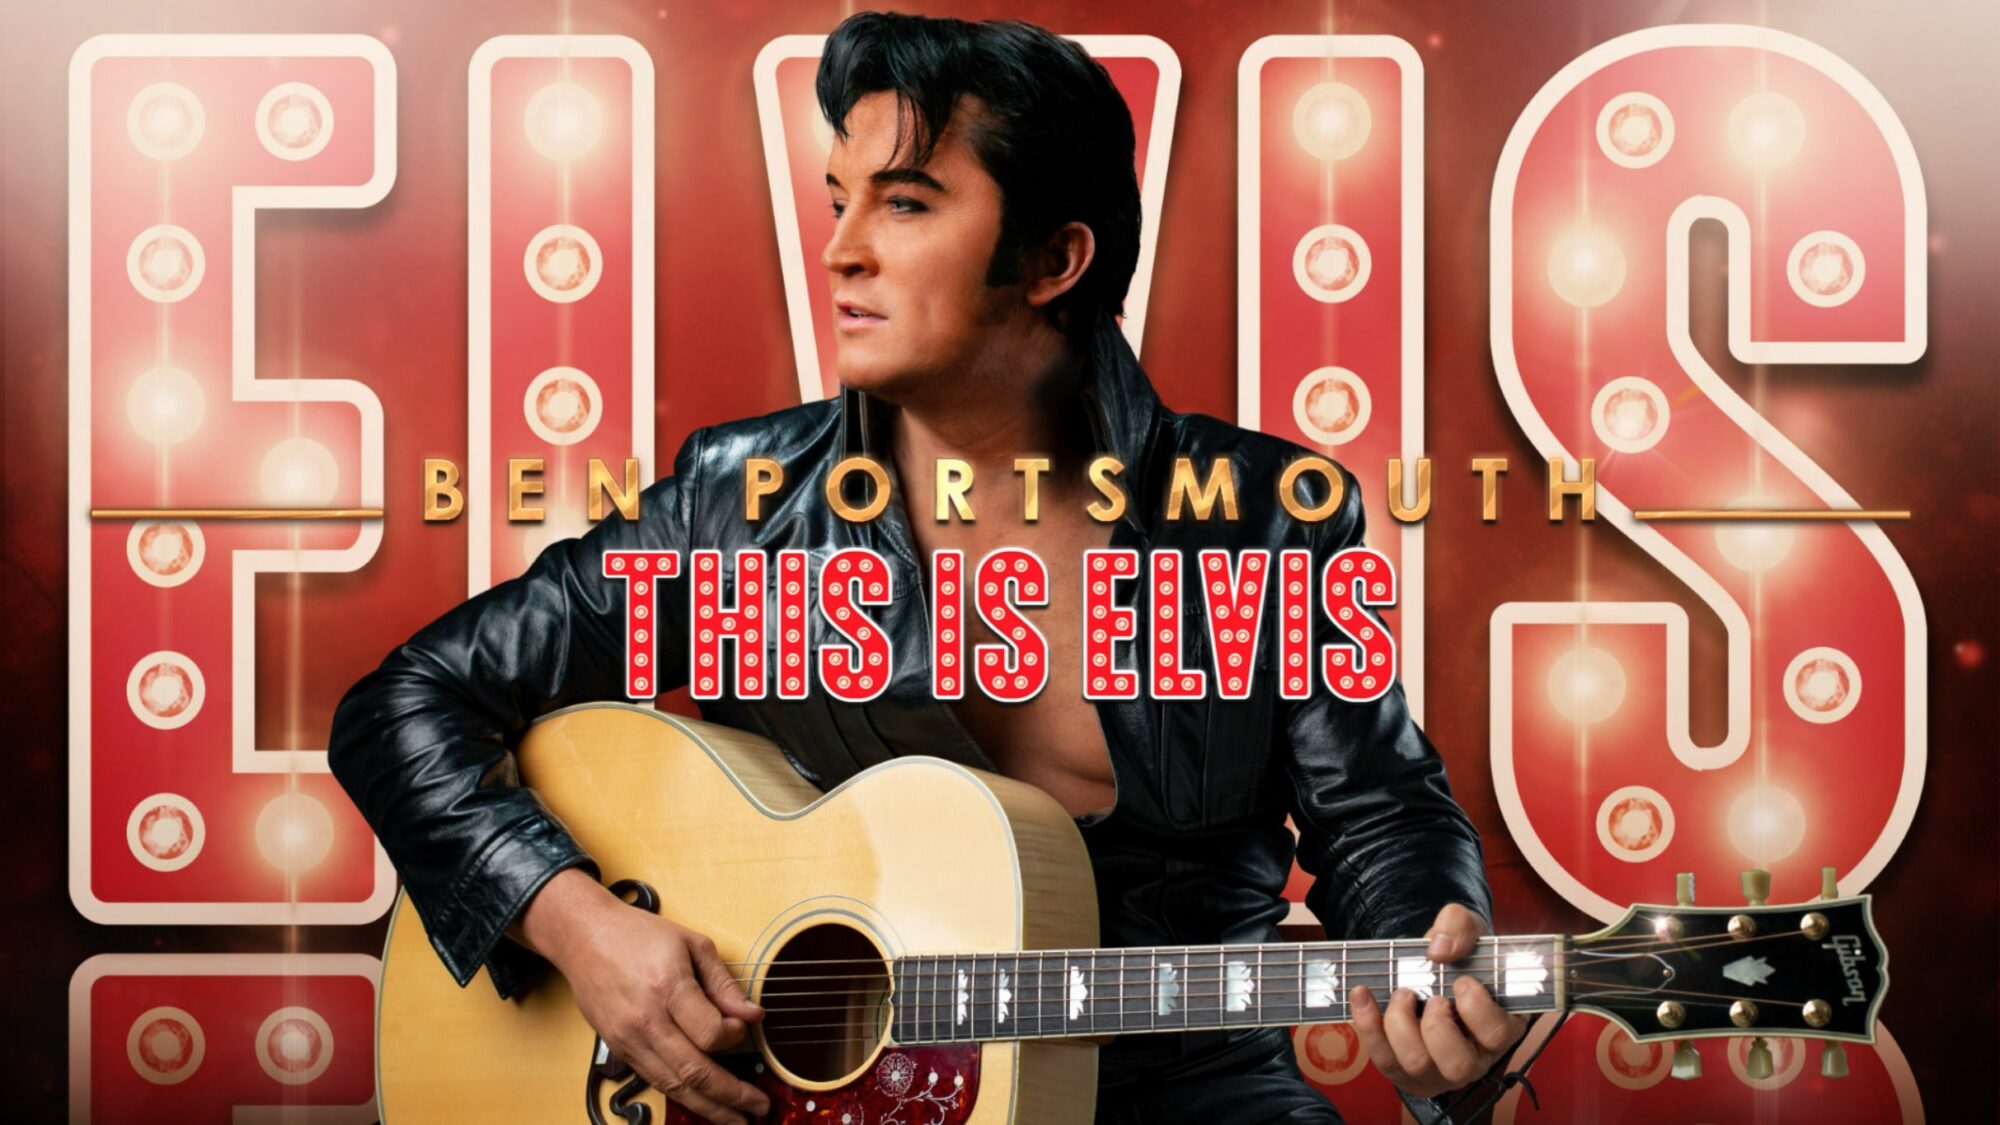 Image name Ben Portsmouth This Is Elvis at York Barbican York the 5 image from the post Ben Portsmouth - This Is Elvis at York Barbican, York in Yorkshire.com.